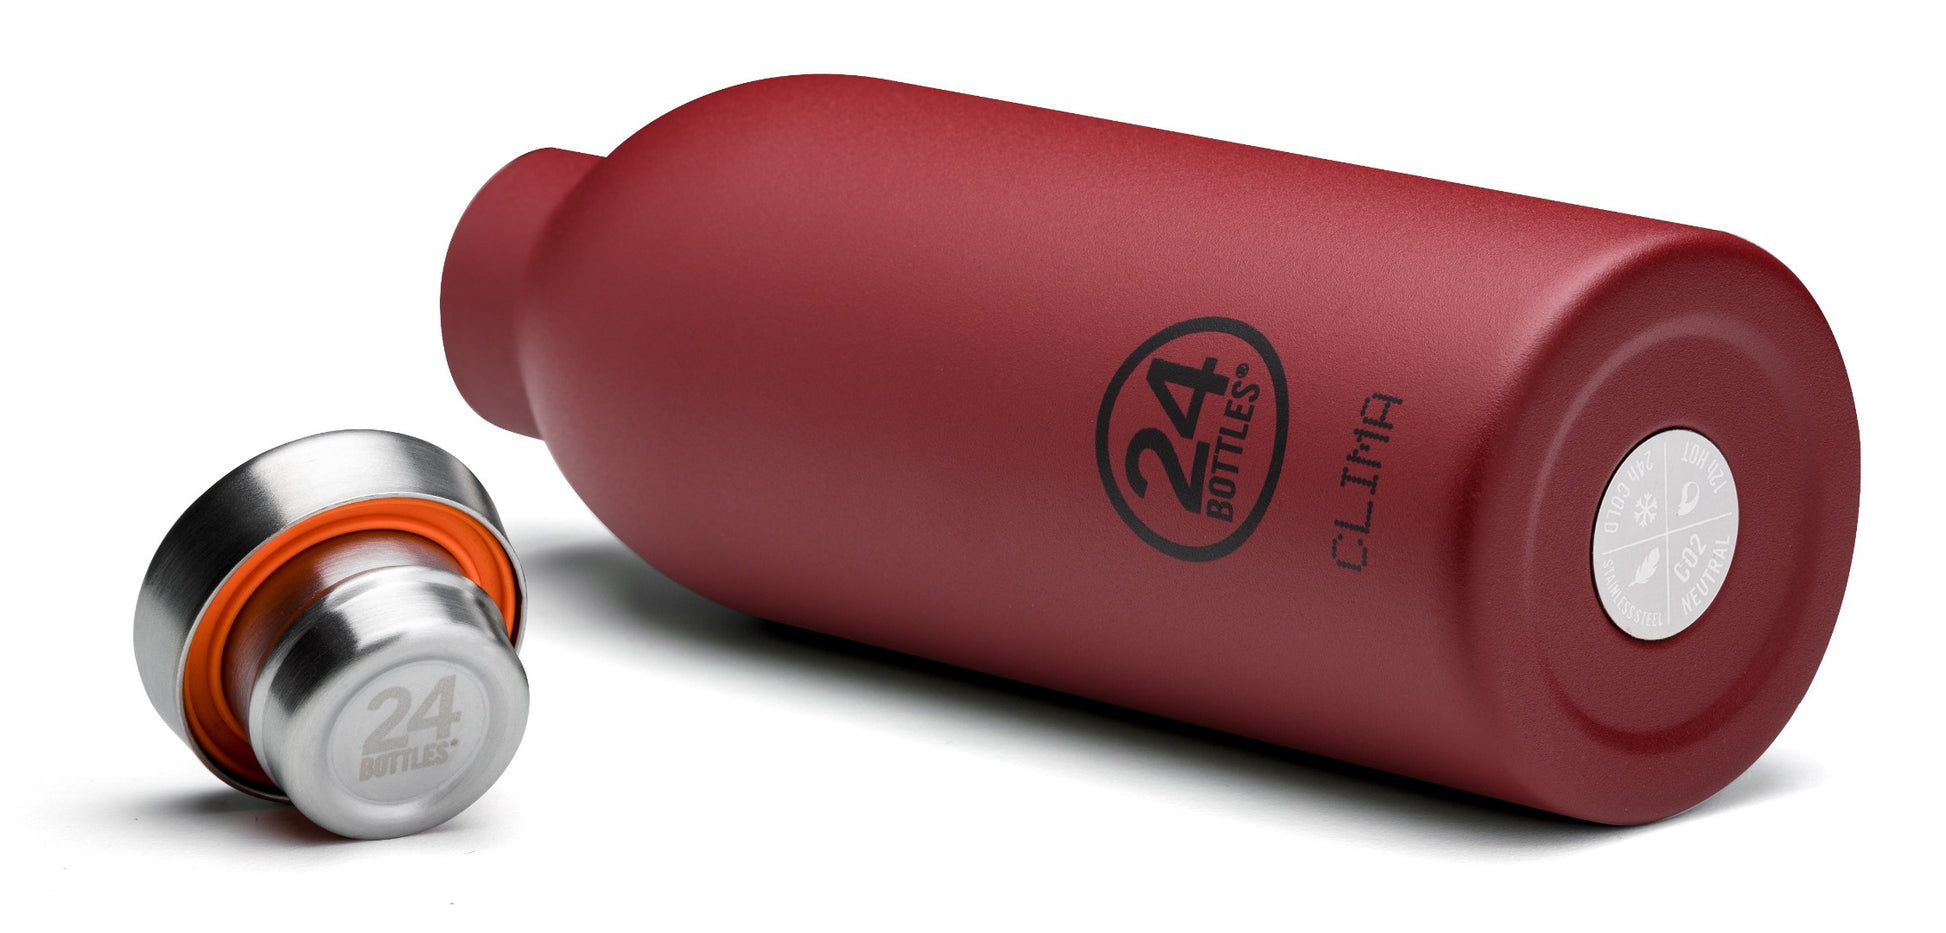 Red Stone coloured metal water bottle with a steel lid. 24 Bottles logo and the word 'CLIMA' are printed on the bottle.